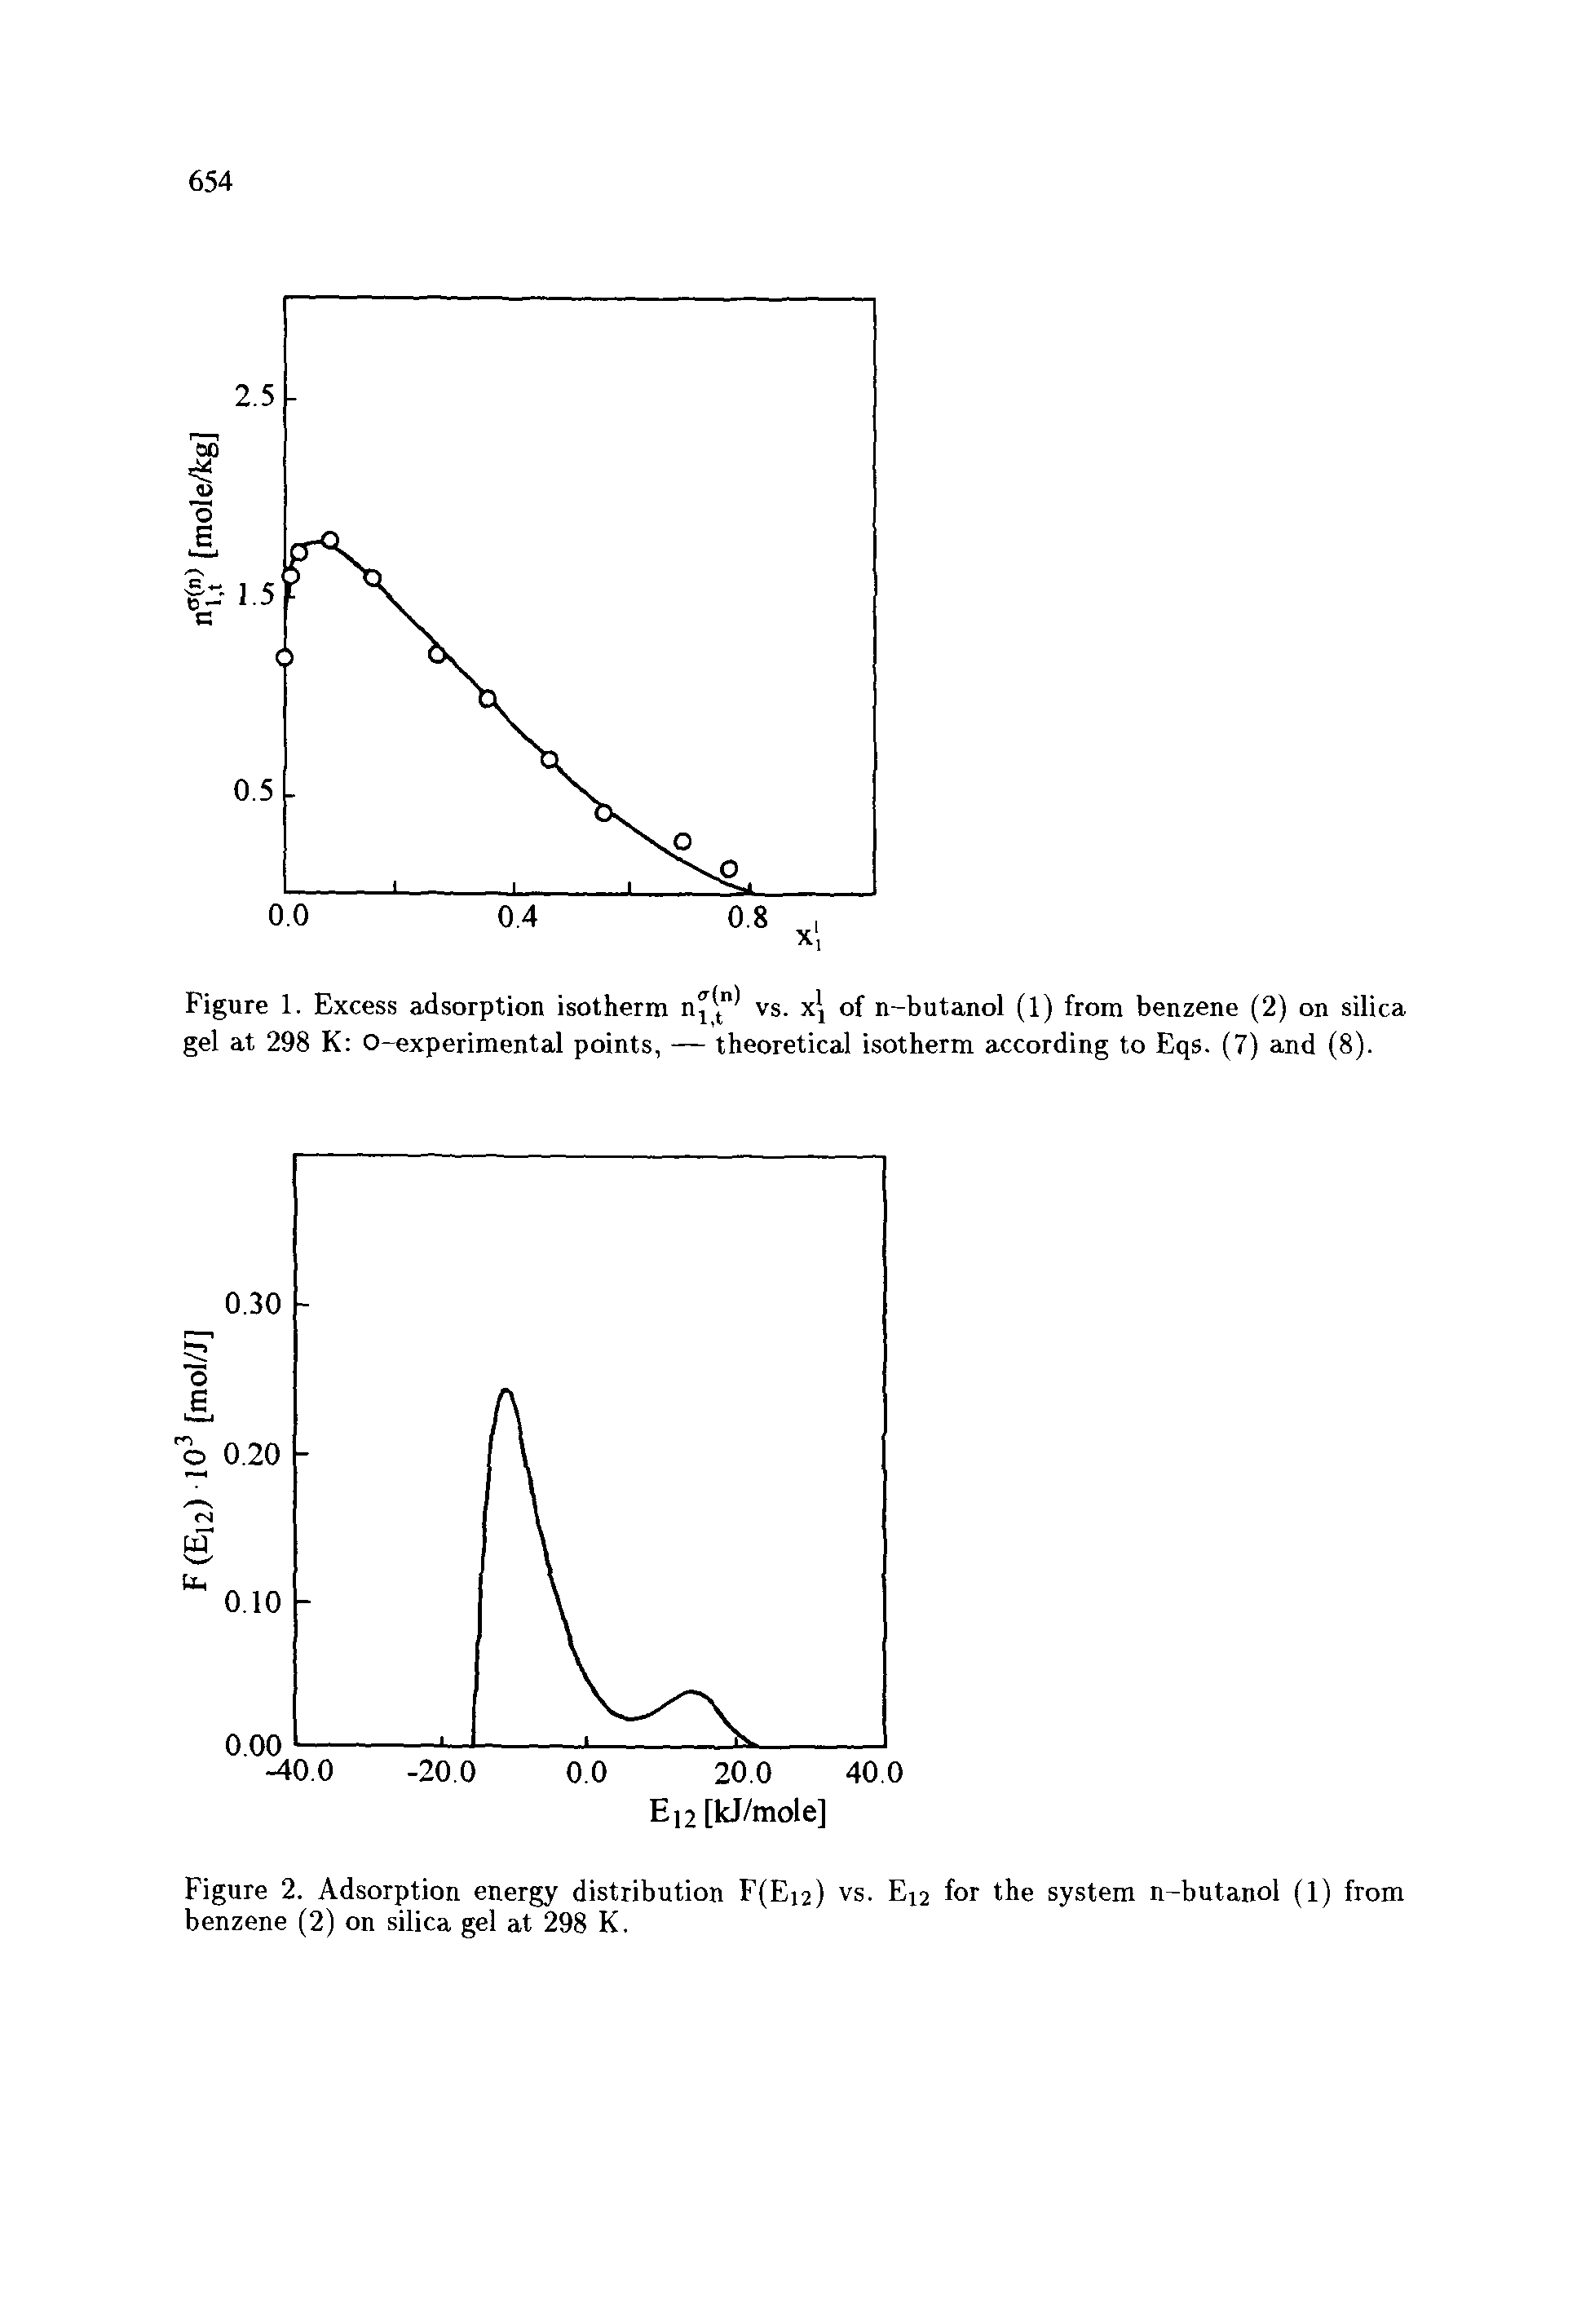 Figure 1. Excess adsorption isotherm nj " vs. x of n-butanol (1) from benzene (2) on silica gel at 298 K 0-experimental points, — theoretical isotherm according to Eqs. (7) and (8).